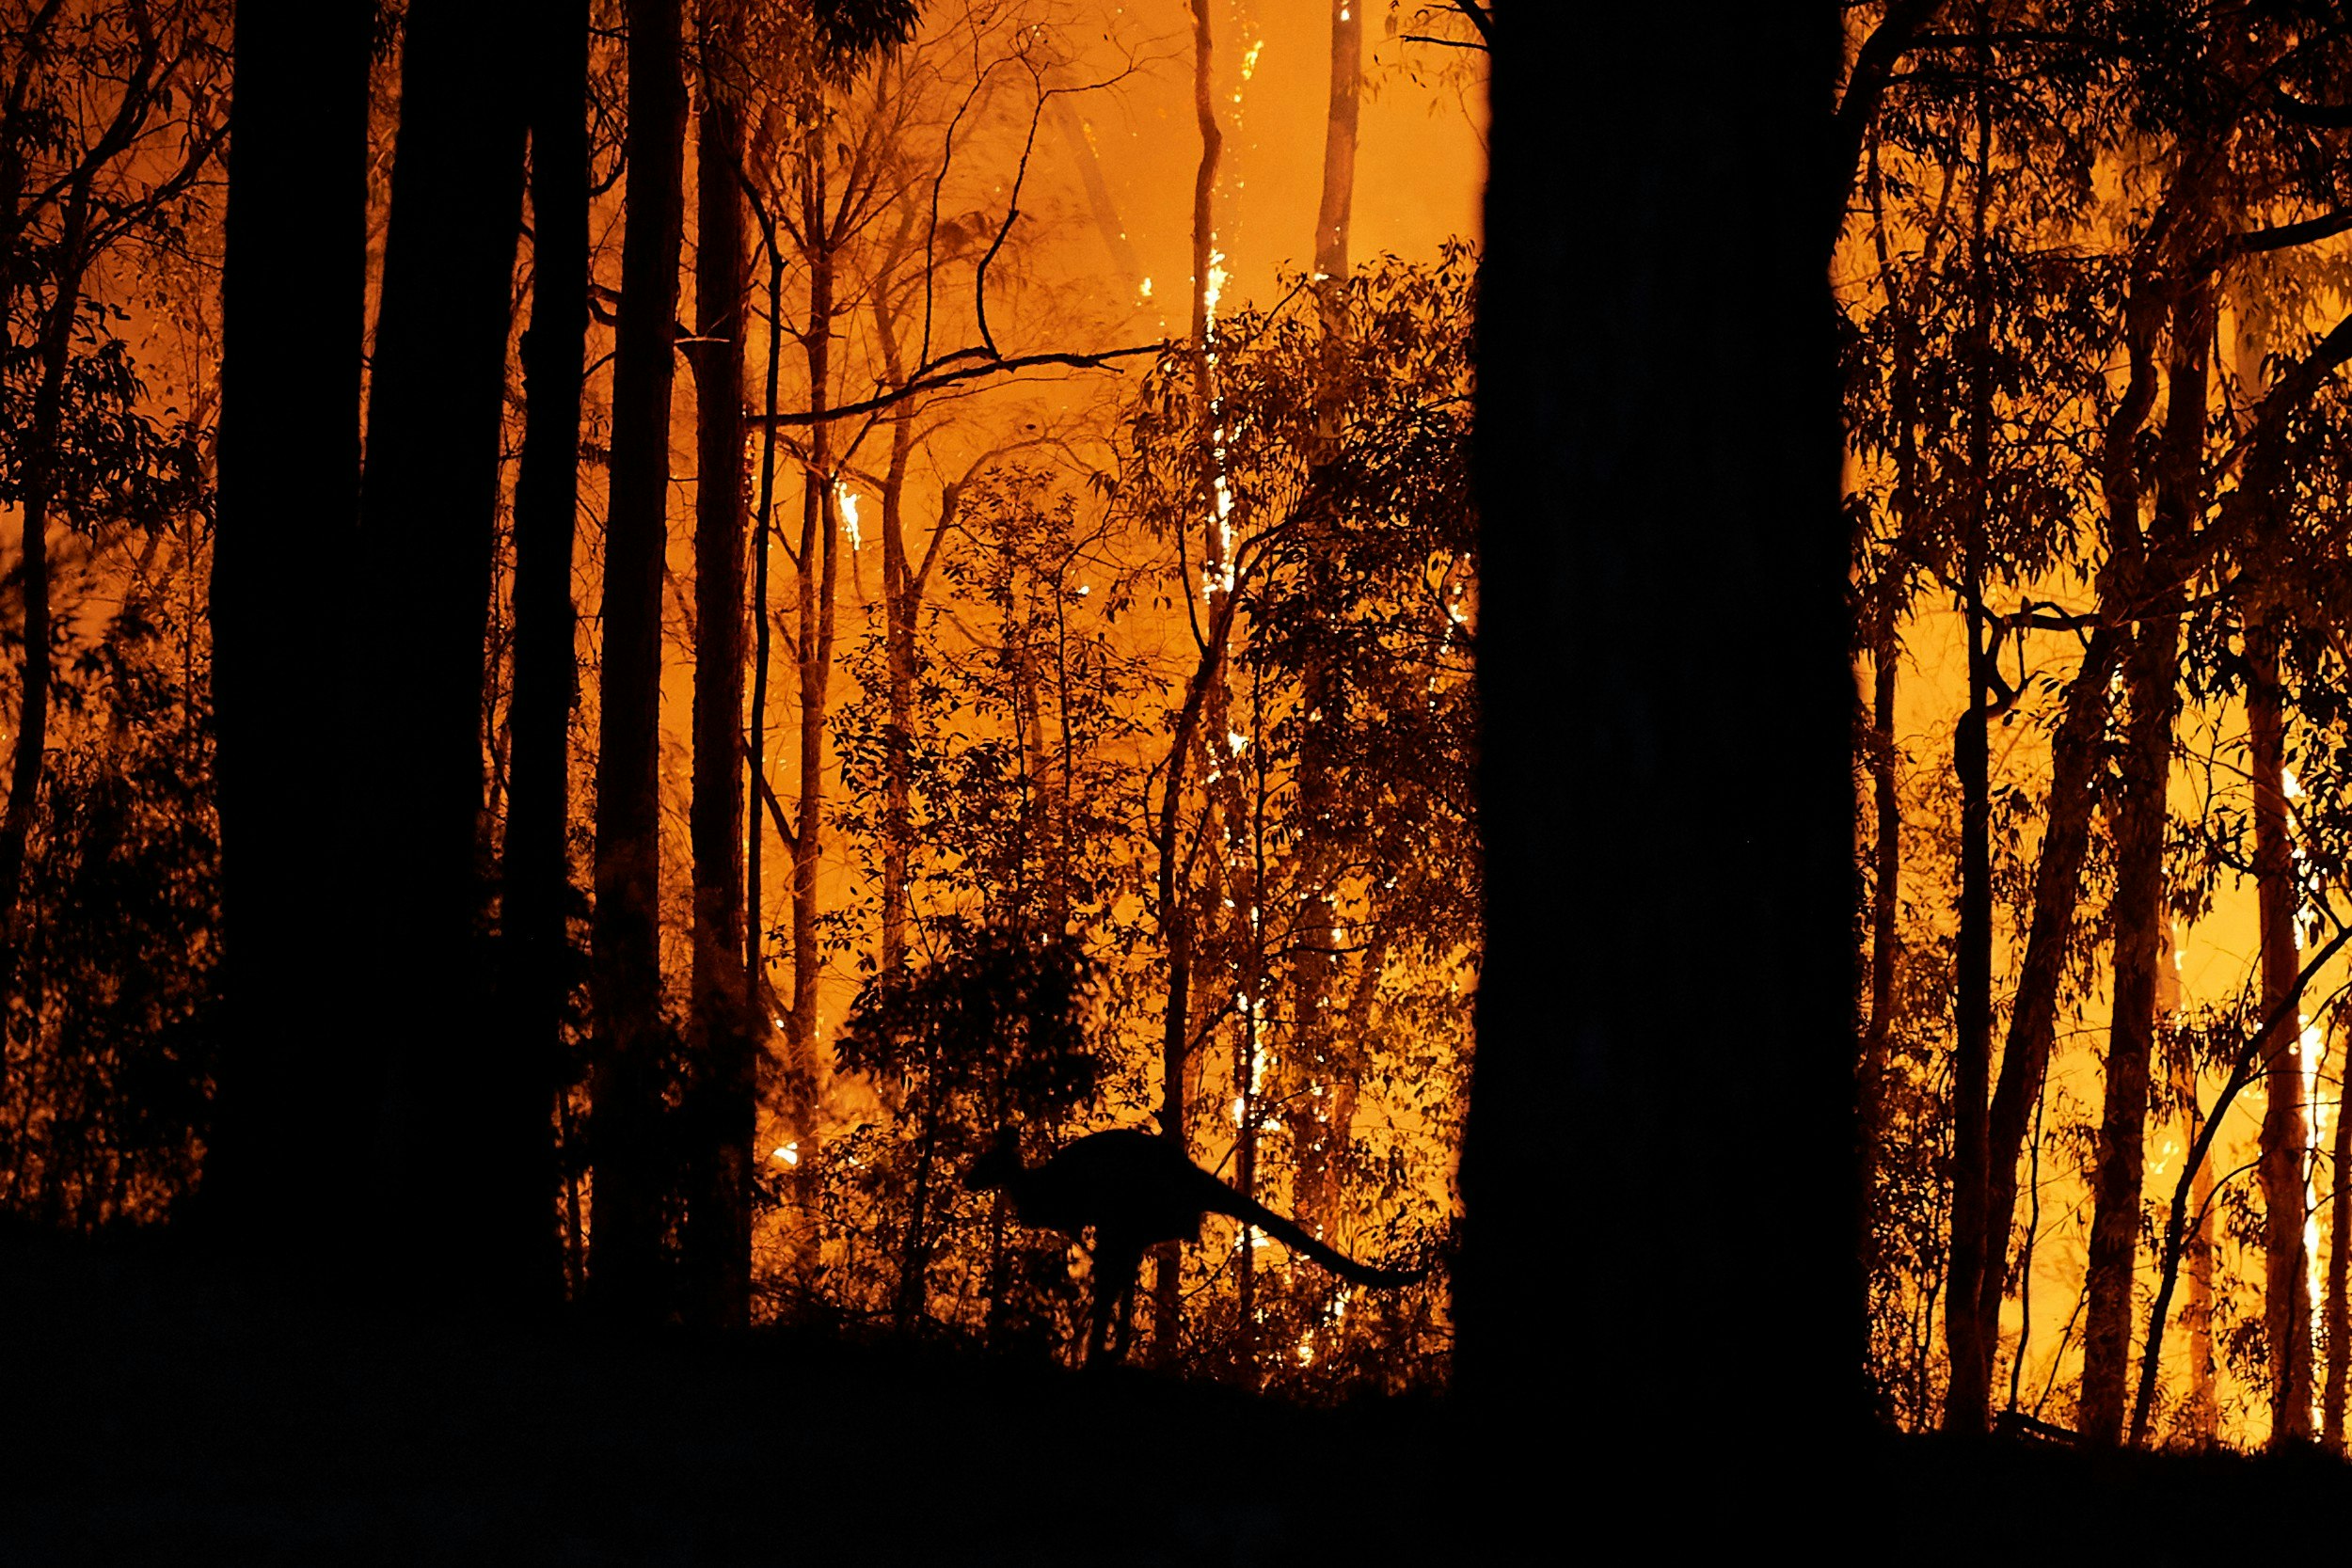 A kangaroo sihouetted against a burning forest 